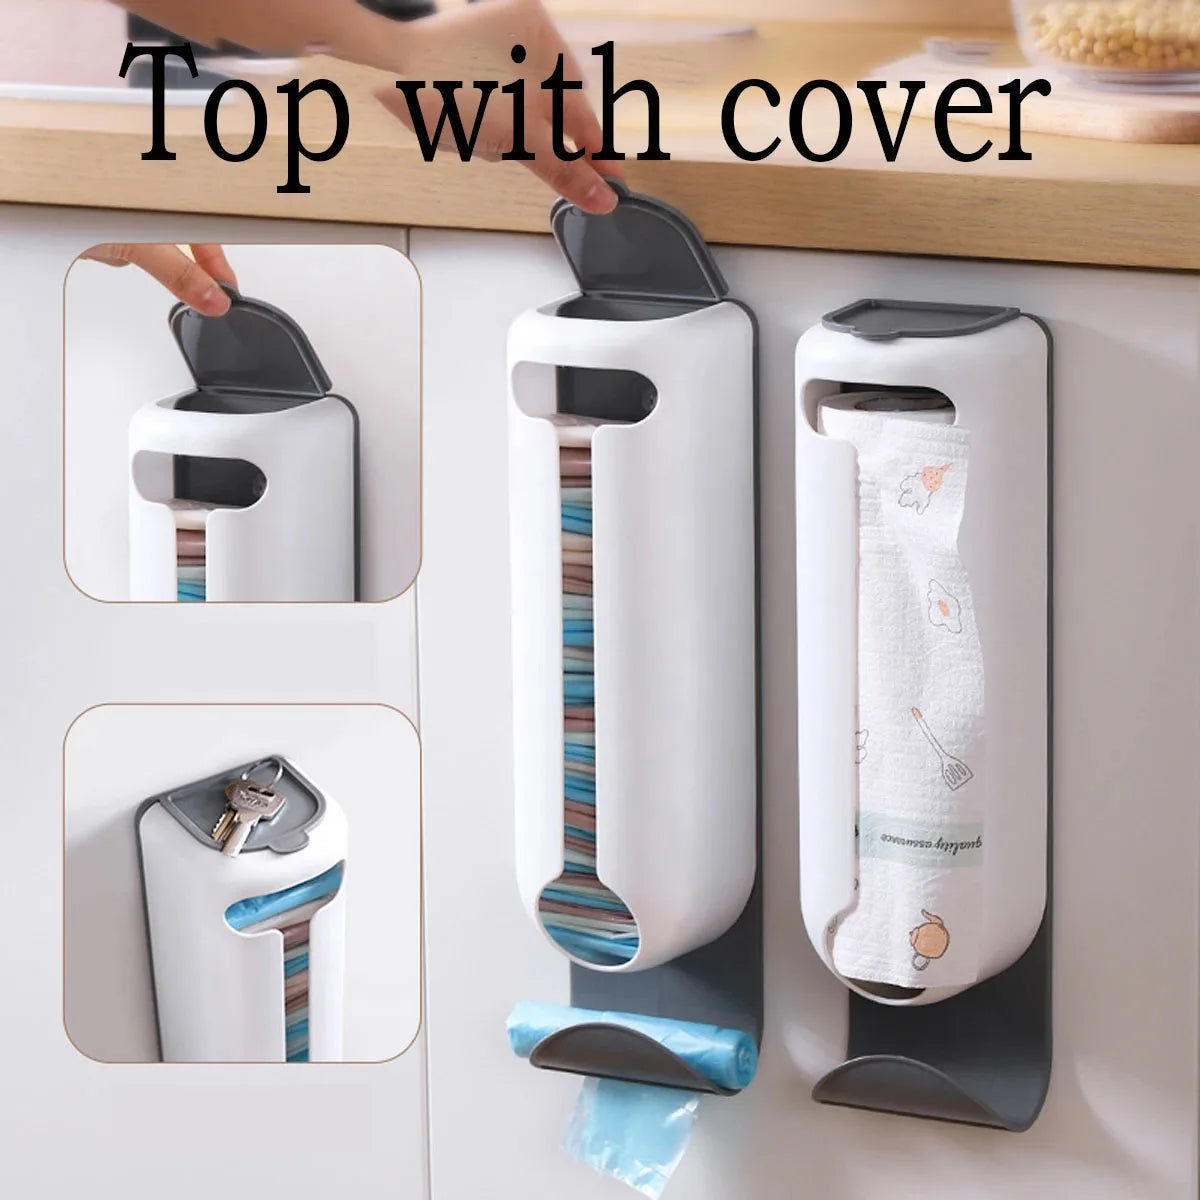 Wall-Mounted Kitchen Grocery Bag Holder - Convenient Plastic Bag Dispenser and Organizer, Space-Saving Old Bags Saver